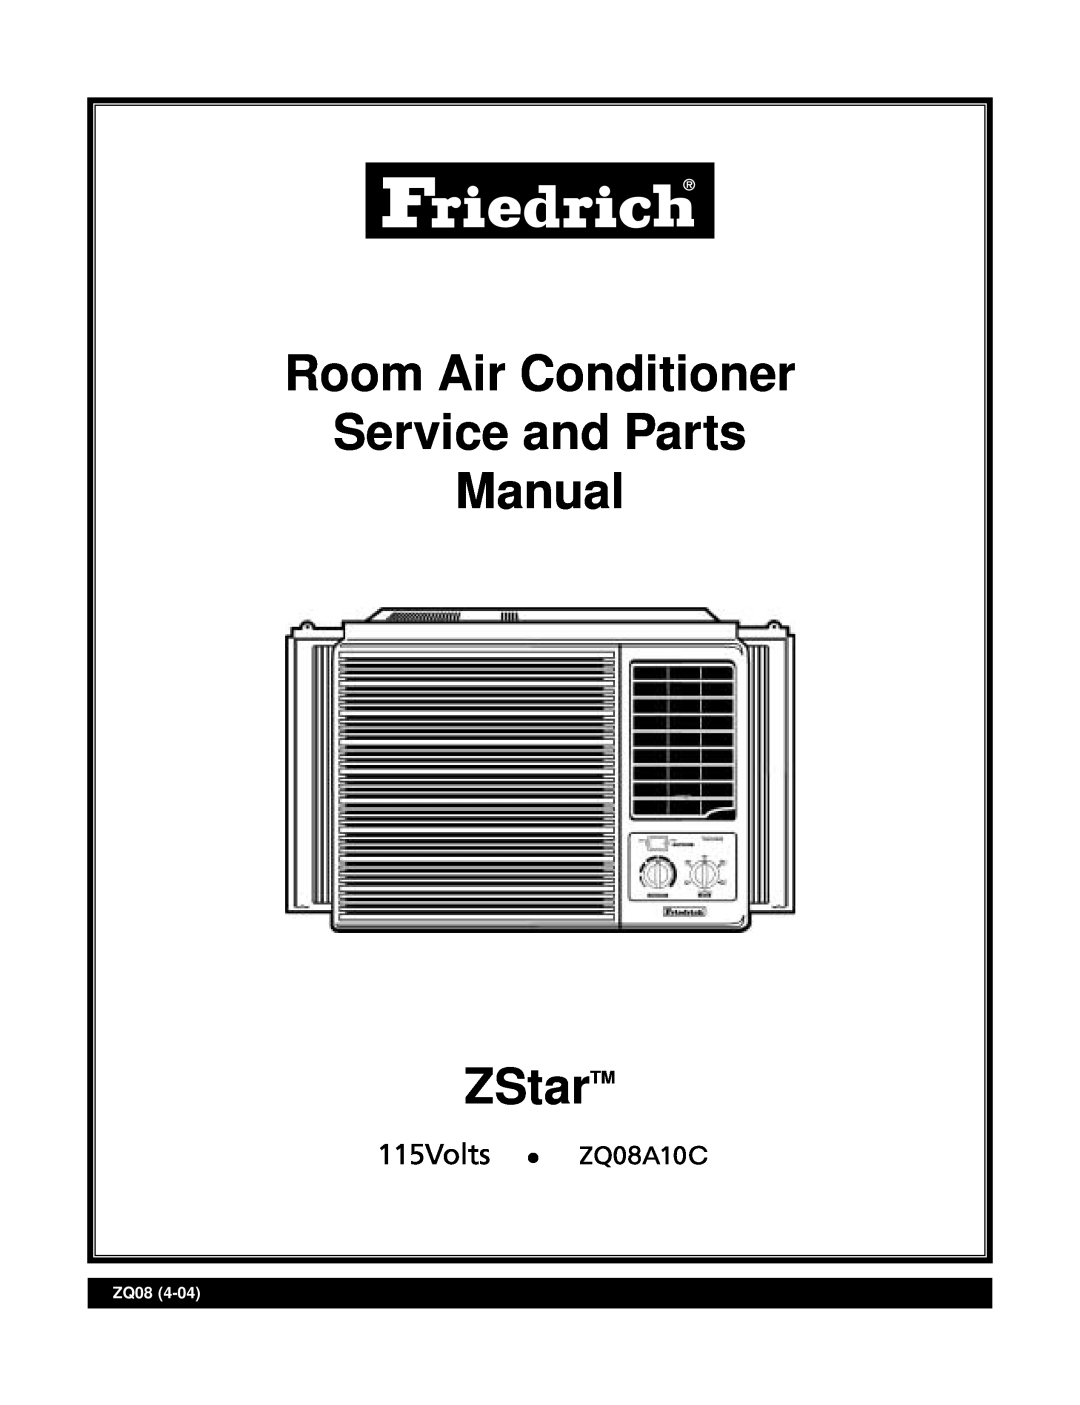 Friedrich ZQ08A10C manual Room Air Conditioner Service and Parts Manual, ZStarTM, ZQ08 01/01 